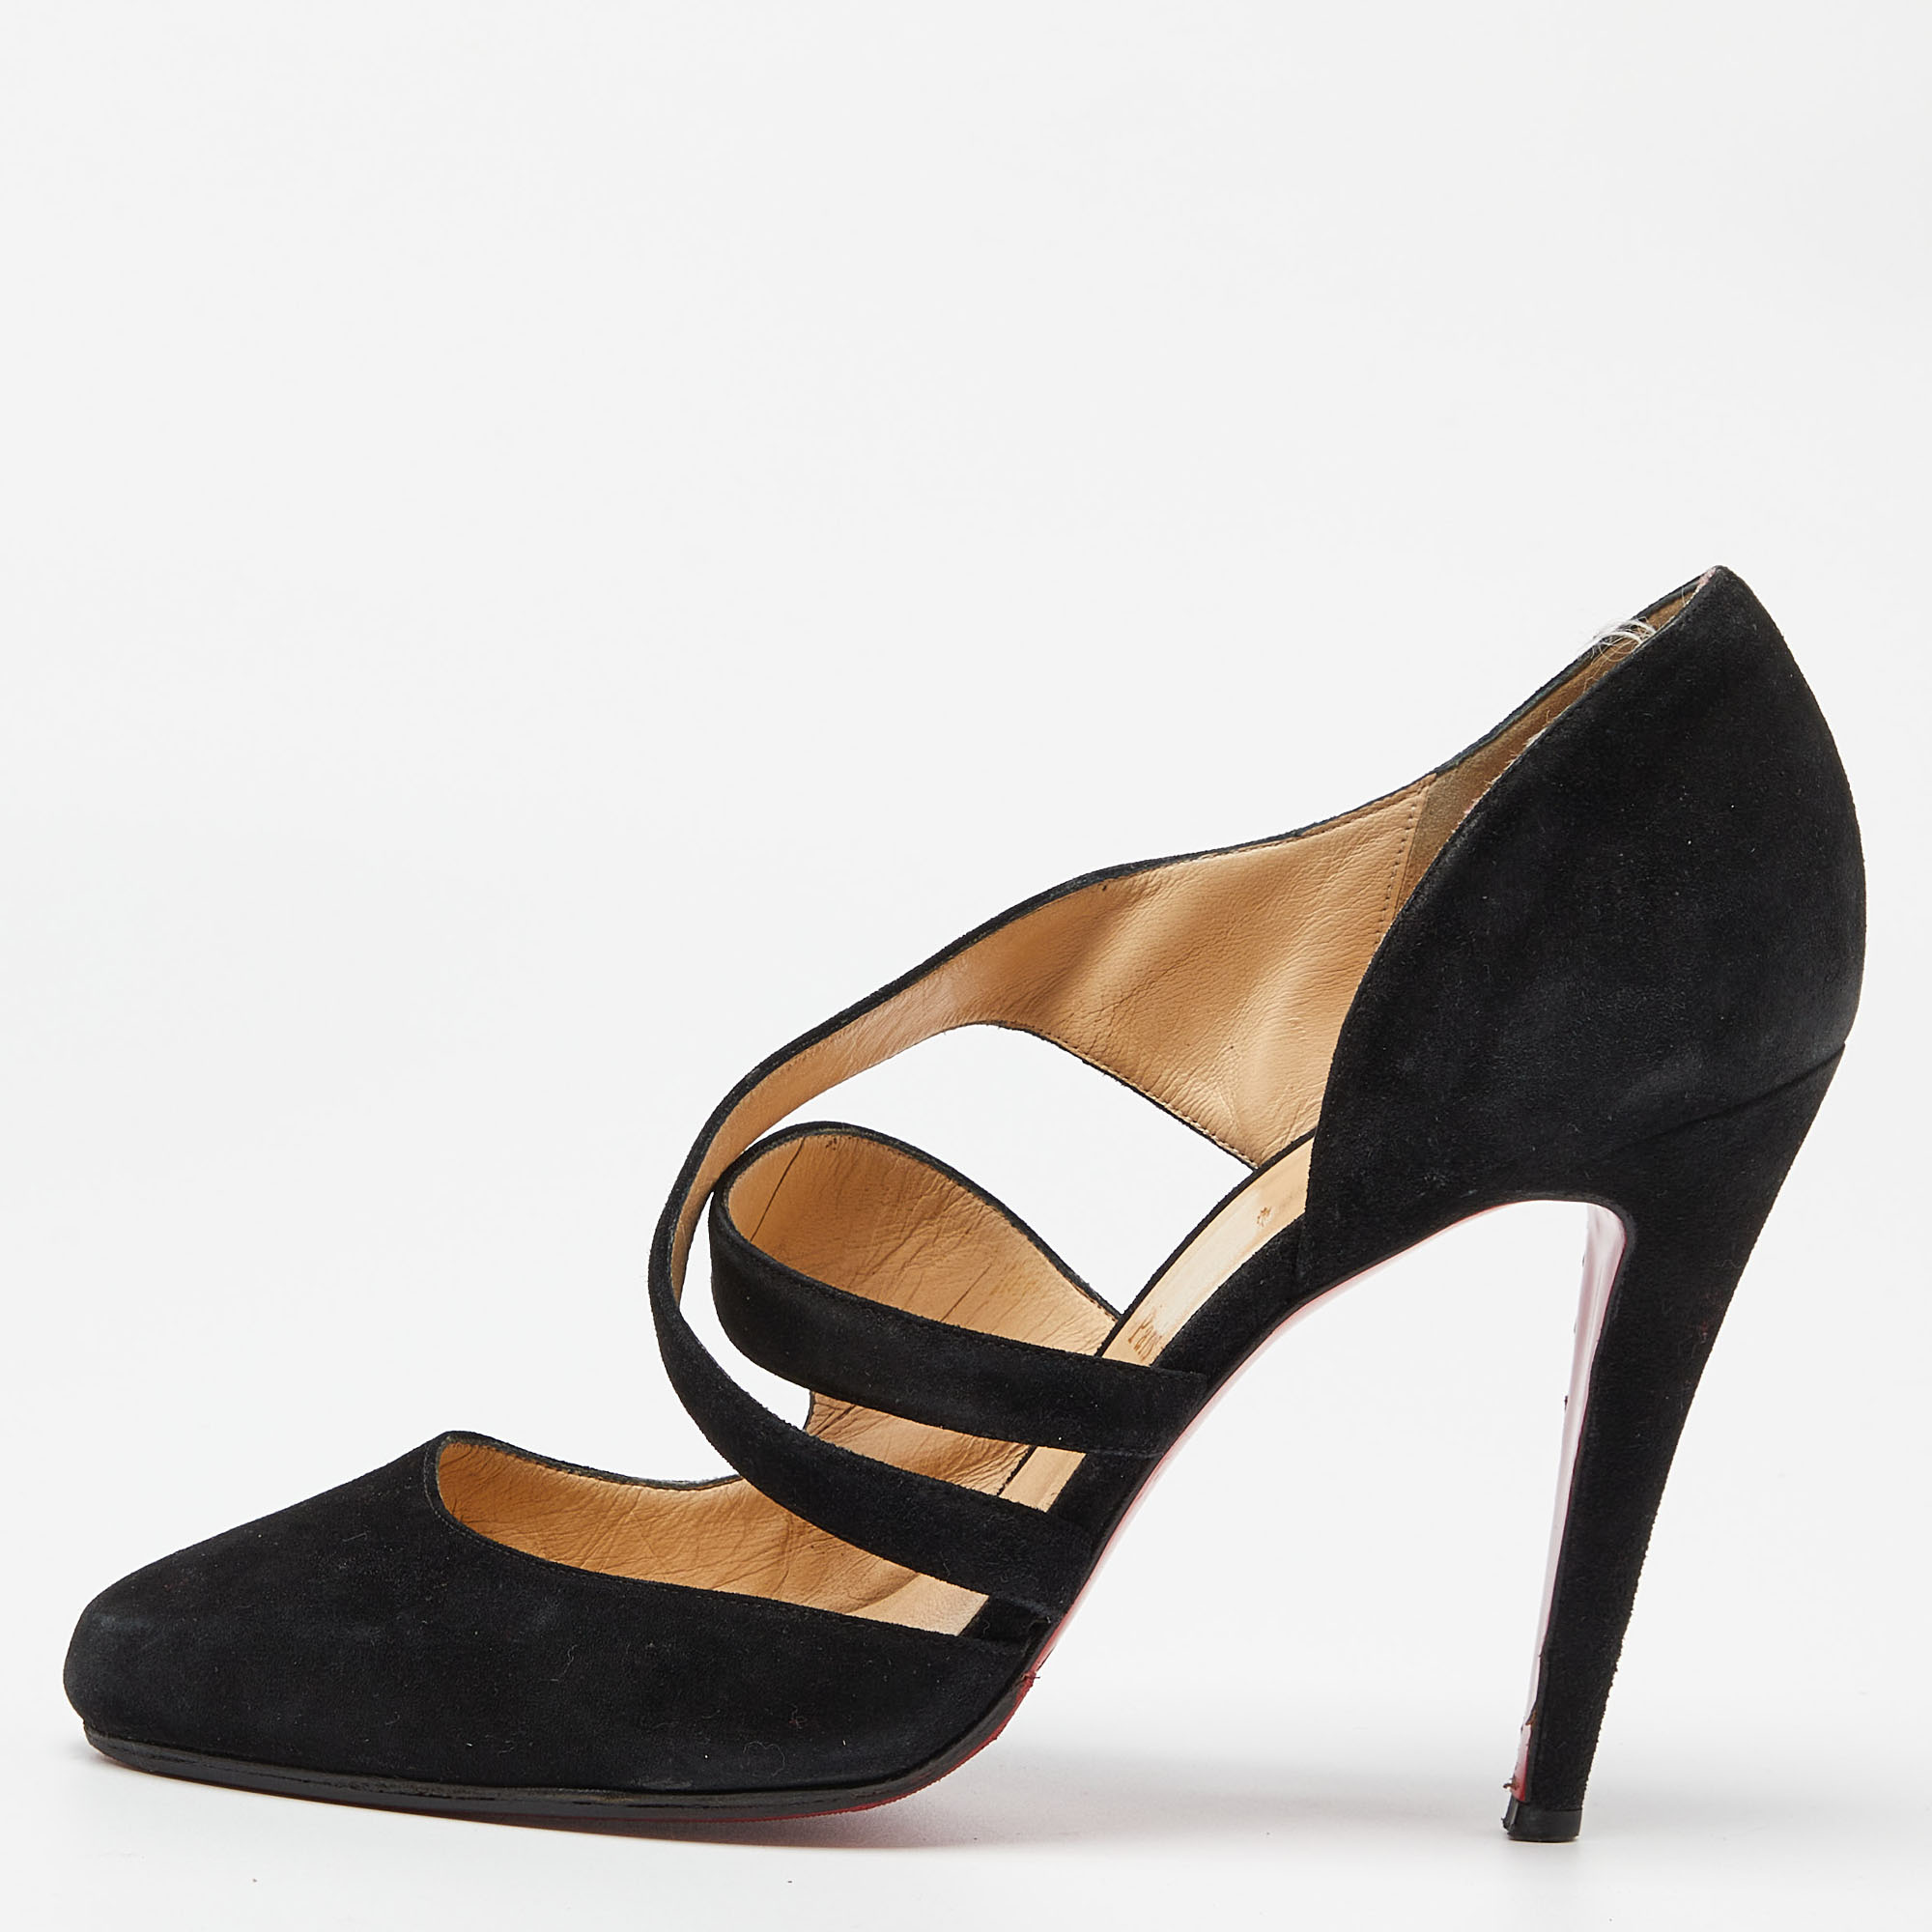 Christian louboutin black suede citoyenne pumps size 41